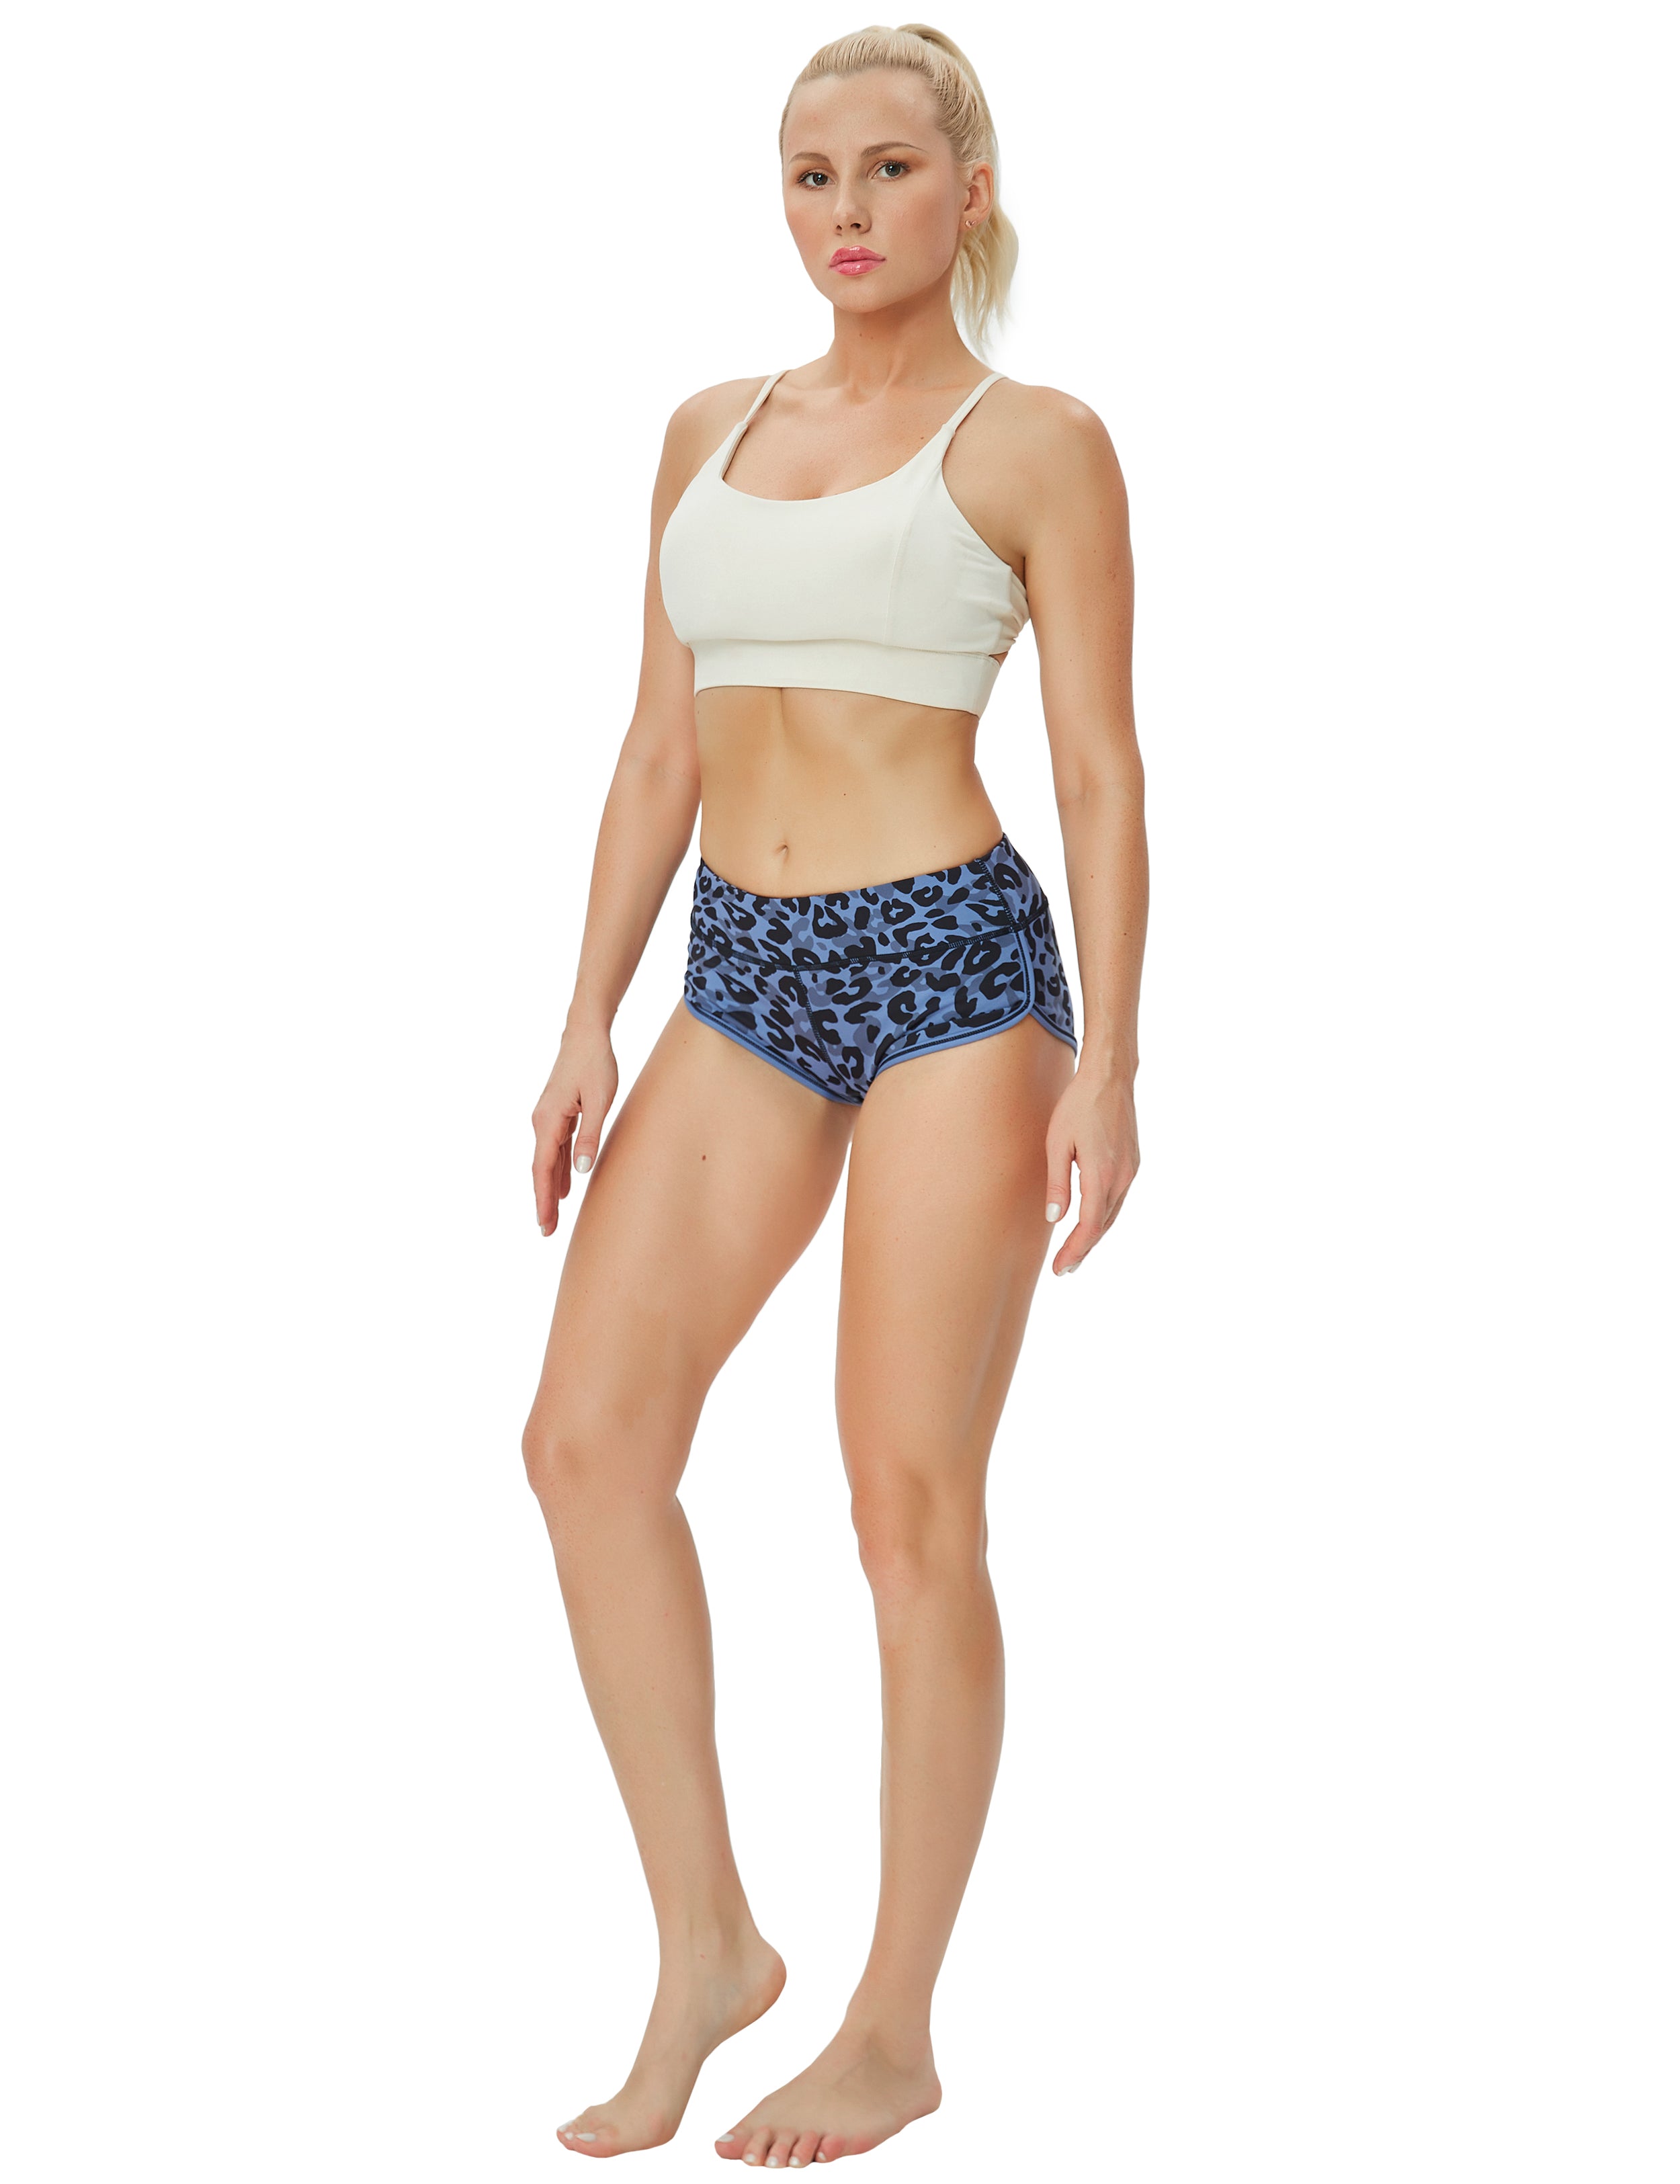 Printed Booty Yoga Shorts navy_leopard Sleek, soft, smooth and totally comfortable: our newest sexy style is here. Softest-ever fabric High elasticity High density 4-way stretch Fabric doesn't attract lint easily No see-through Moisture-wicking Machine wash 78% Polyester, 22% Spandex